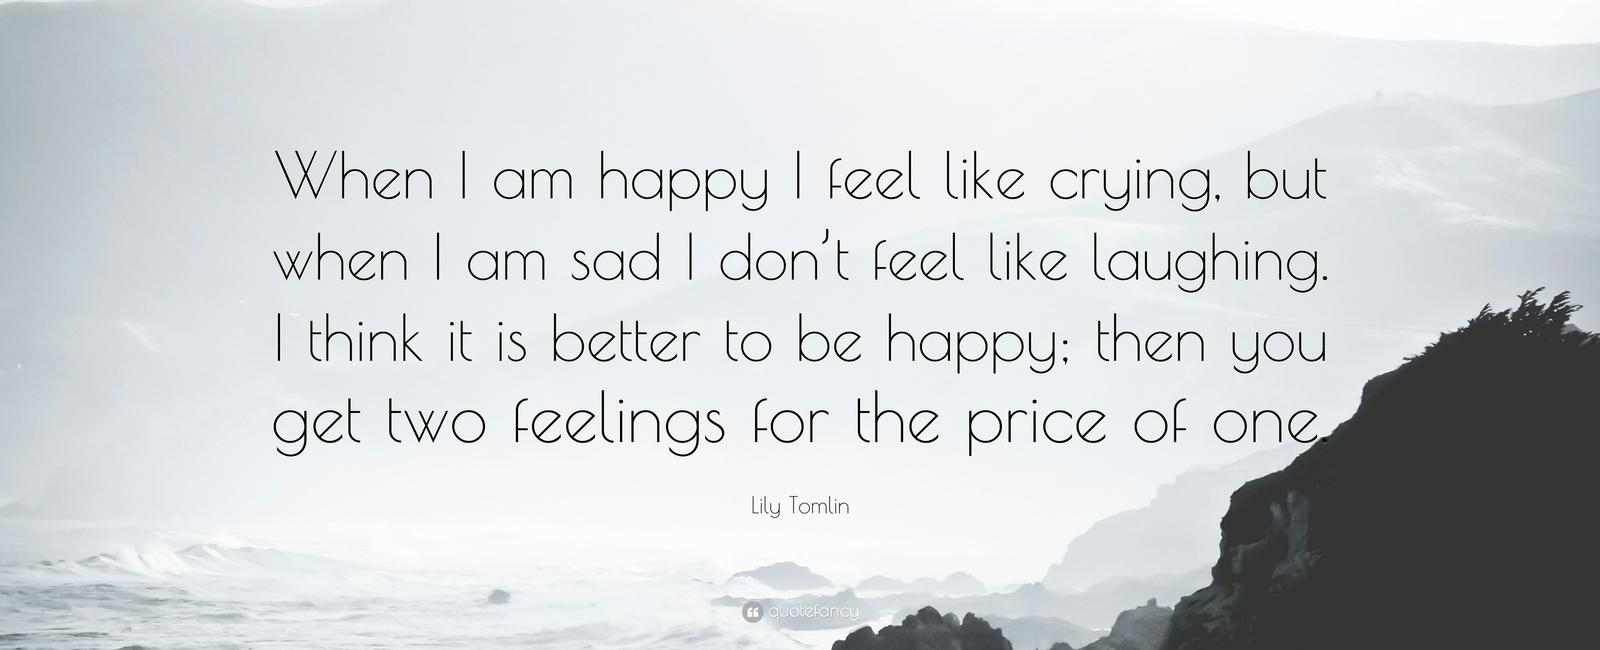 Crying makes you feel happier